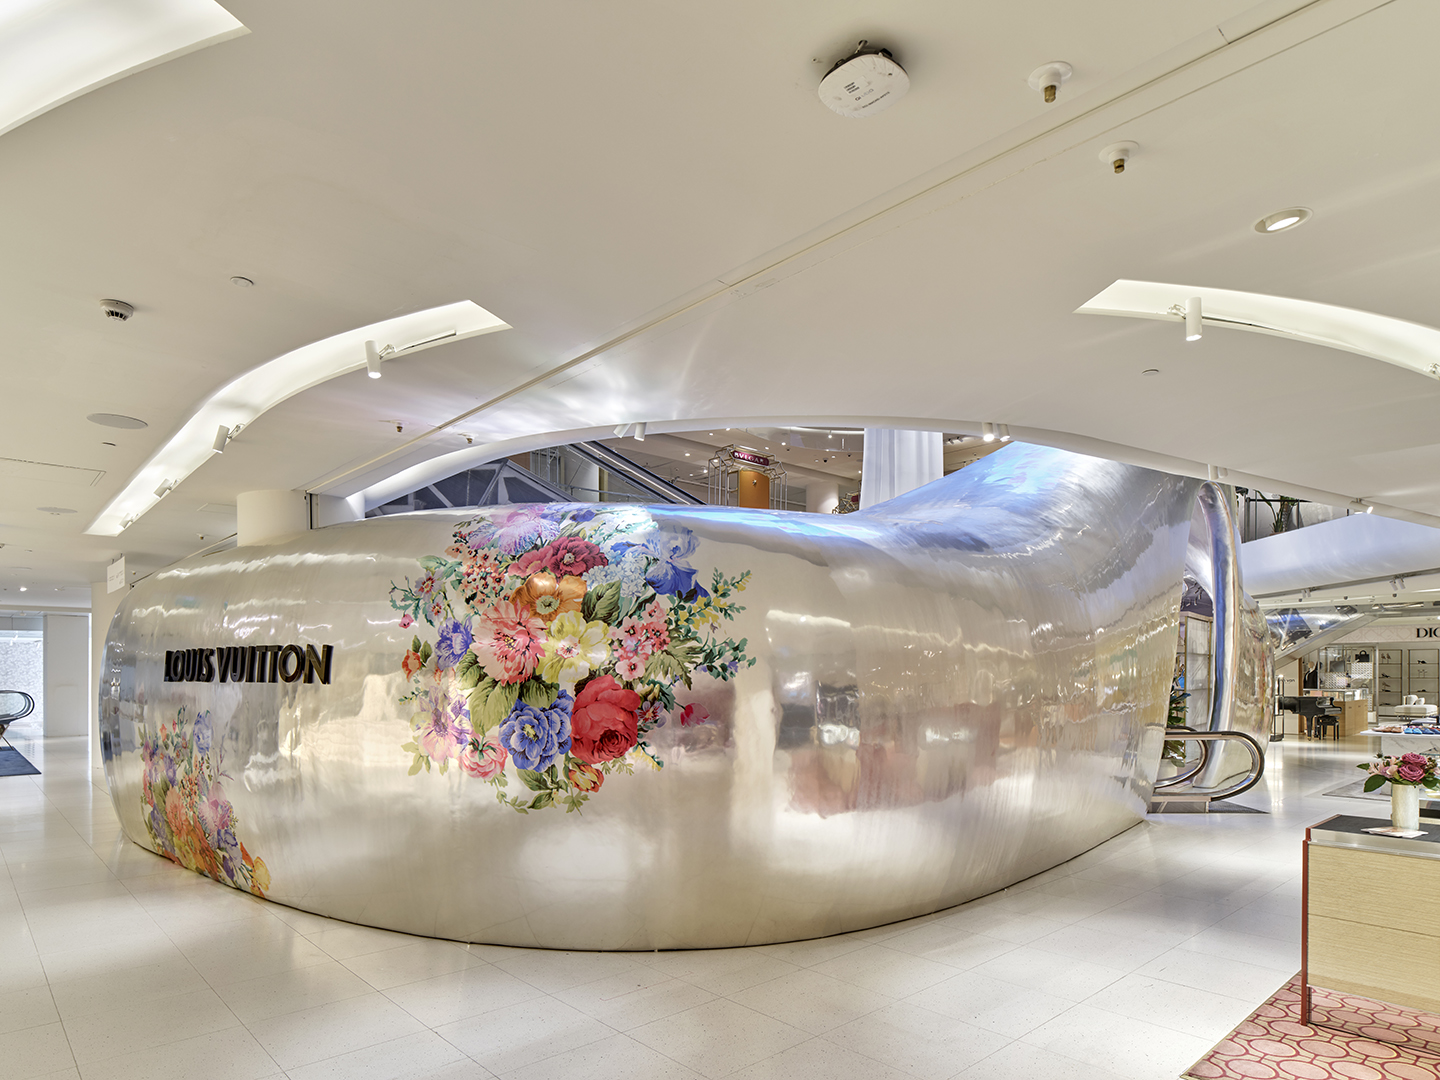 Louis vuitton headquarters in spain—creation of a new reception